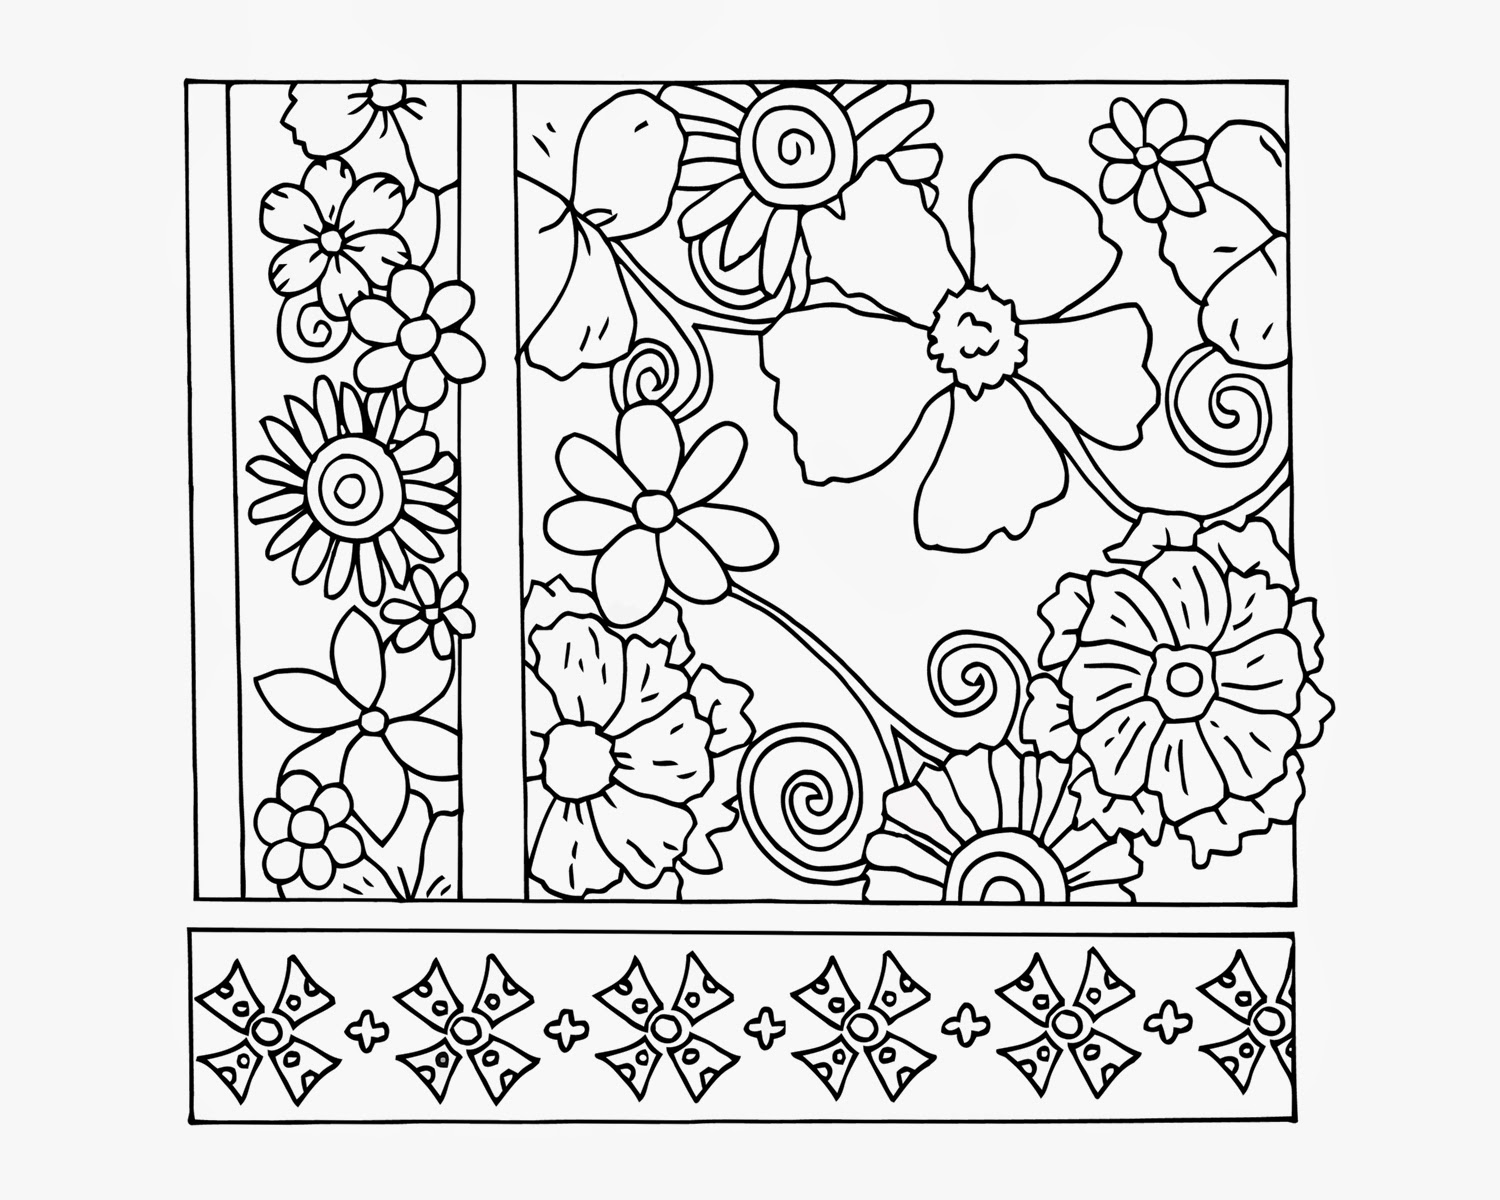 april-showers-coloring-pages-at-getcolorings-free-printable-colorings-pages-to-print-and-color